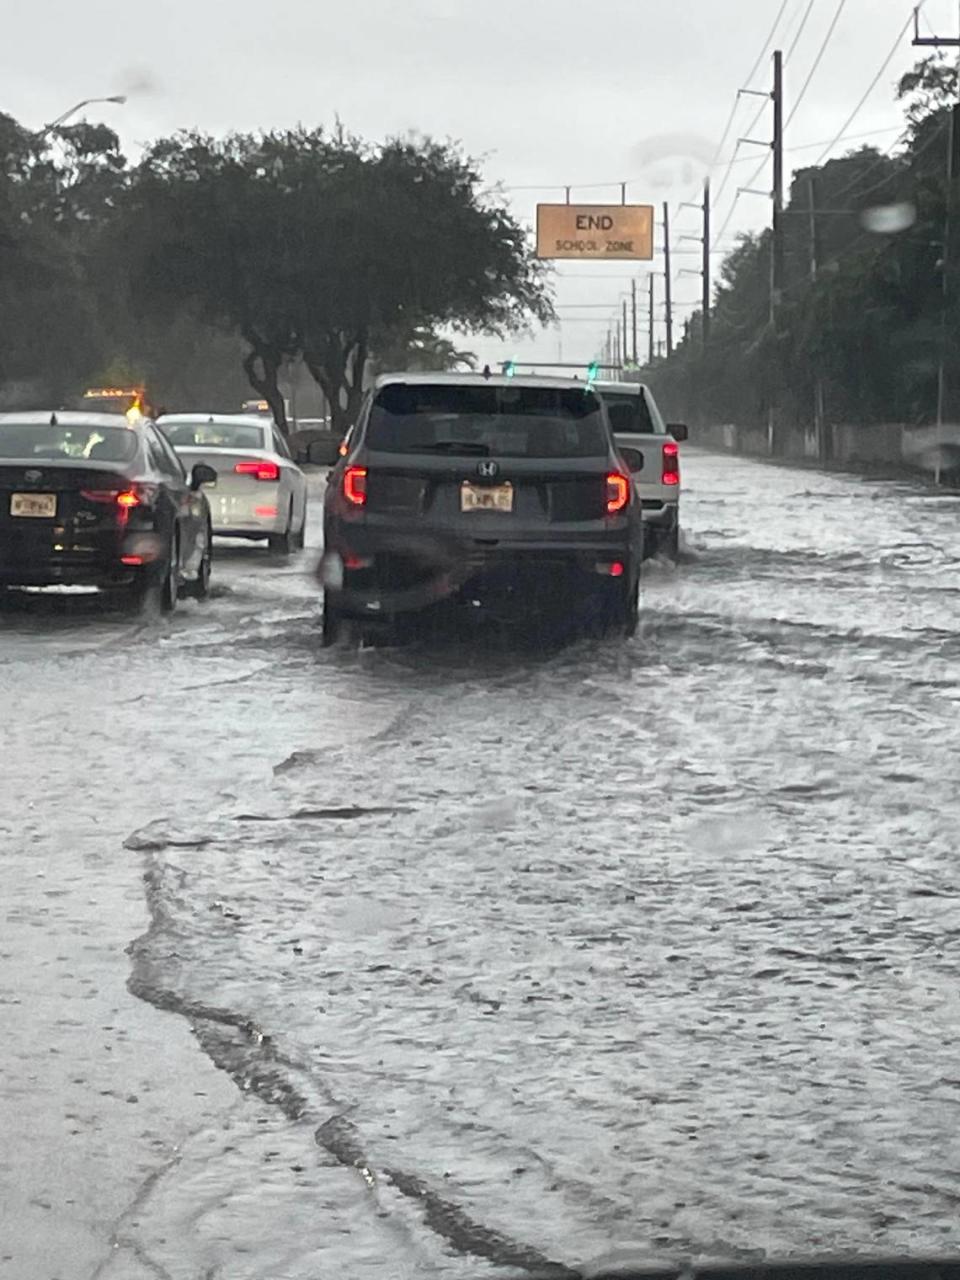 Flooding Wednesday afternoon on Stirling Road near 56th Avenue in Hollywood.